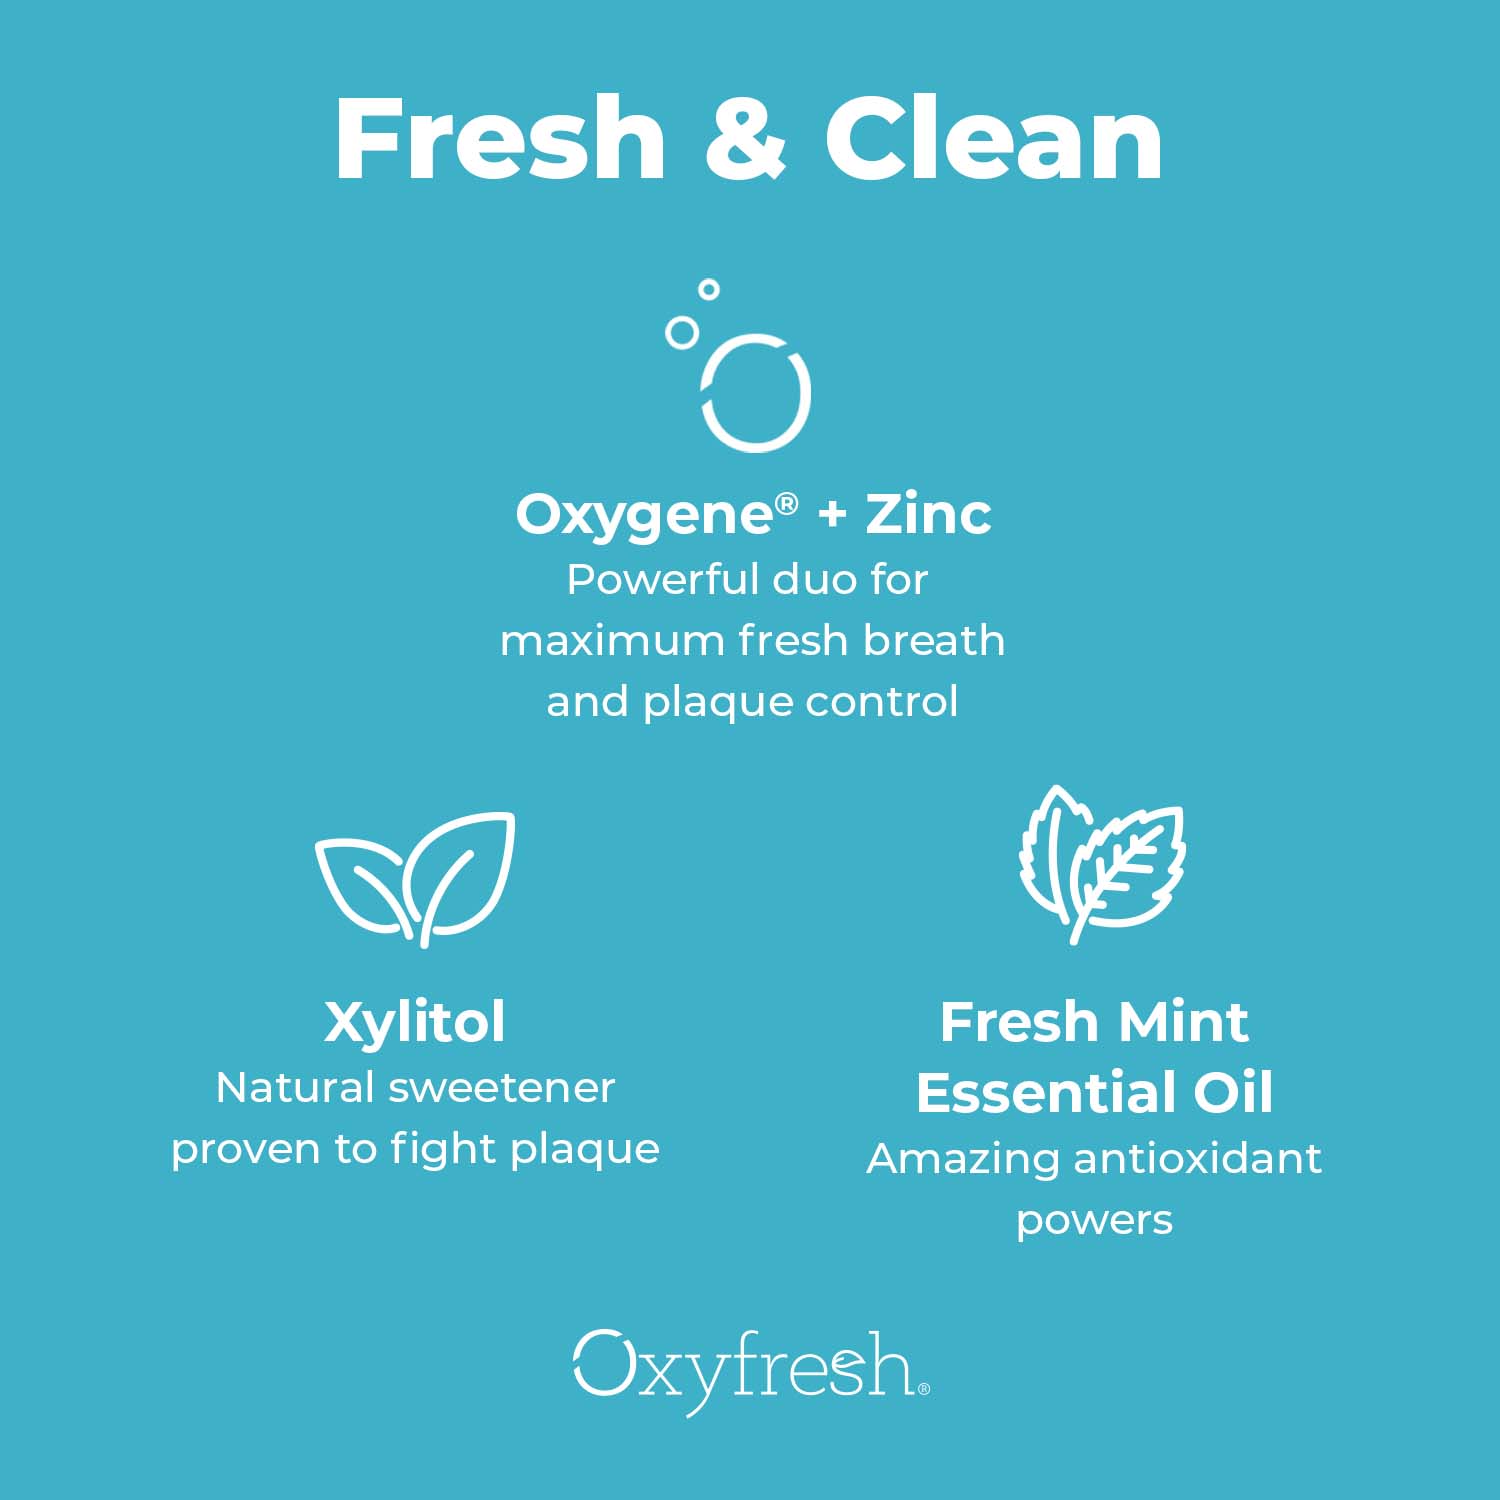 oxyfresh-pro-formula-zinc-mouthwash-fresh-and-clean-with-oxygene-and-zinc-xylitol-and-fresh-mint-essential-oil